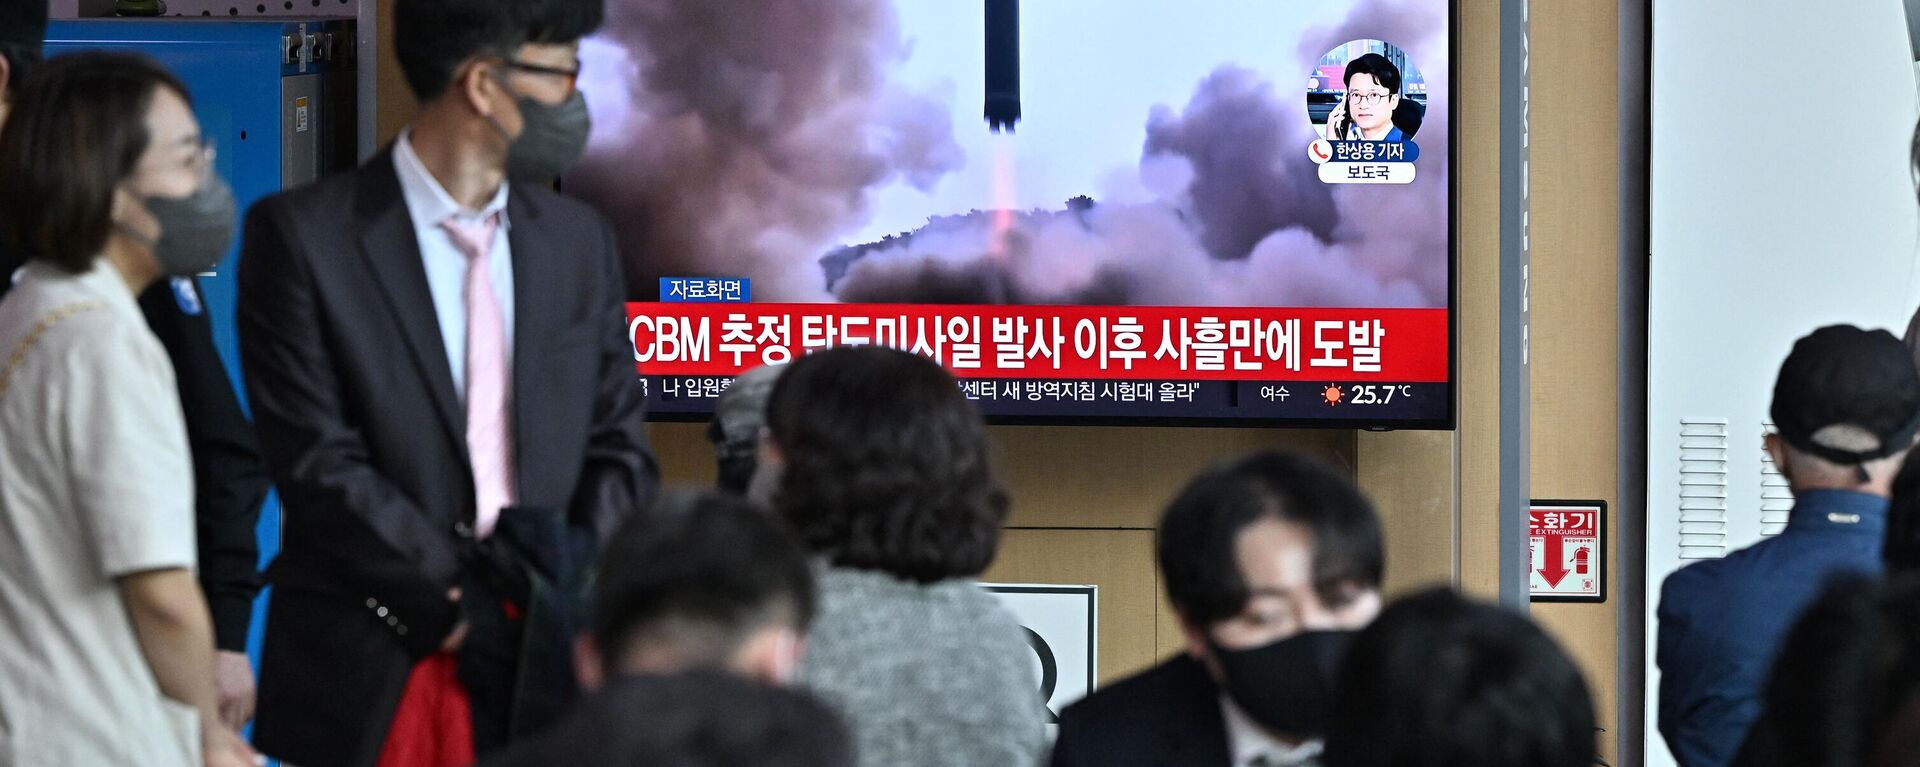 People watch a television screen showing a news broadcast with file footage of a North Korean missile test, at a railway station in Seoul on May 7, 2022, after North Korea fired a submarine-launched ballistic missile according to South Korea's military. - Sputnik भारत, 1920, 04.10.2023